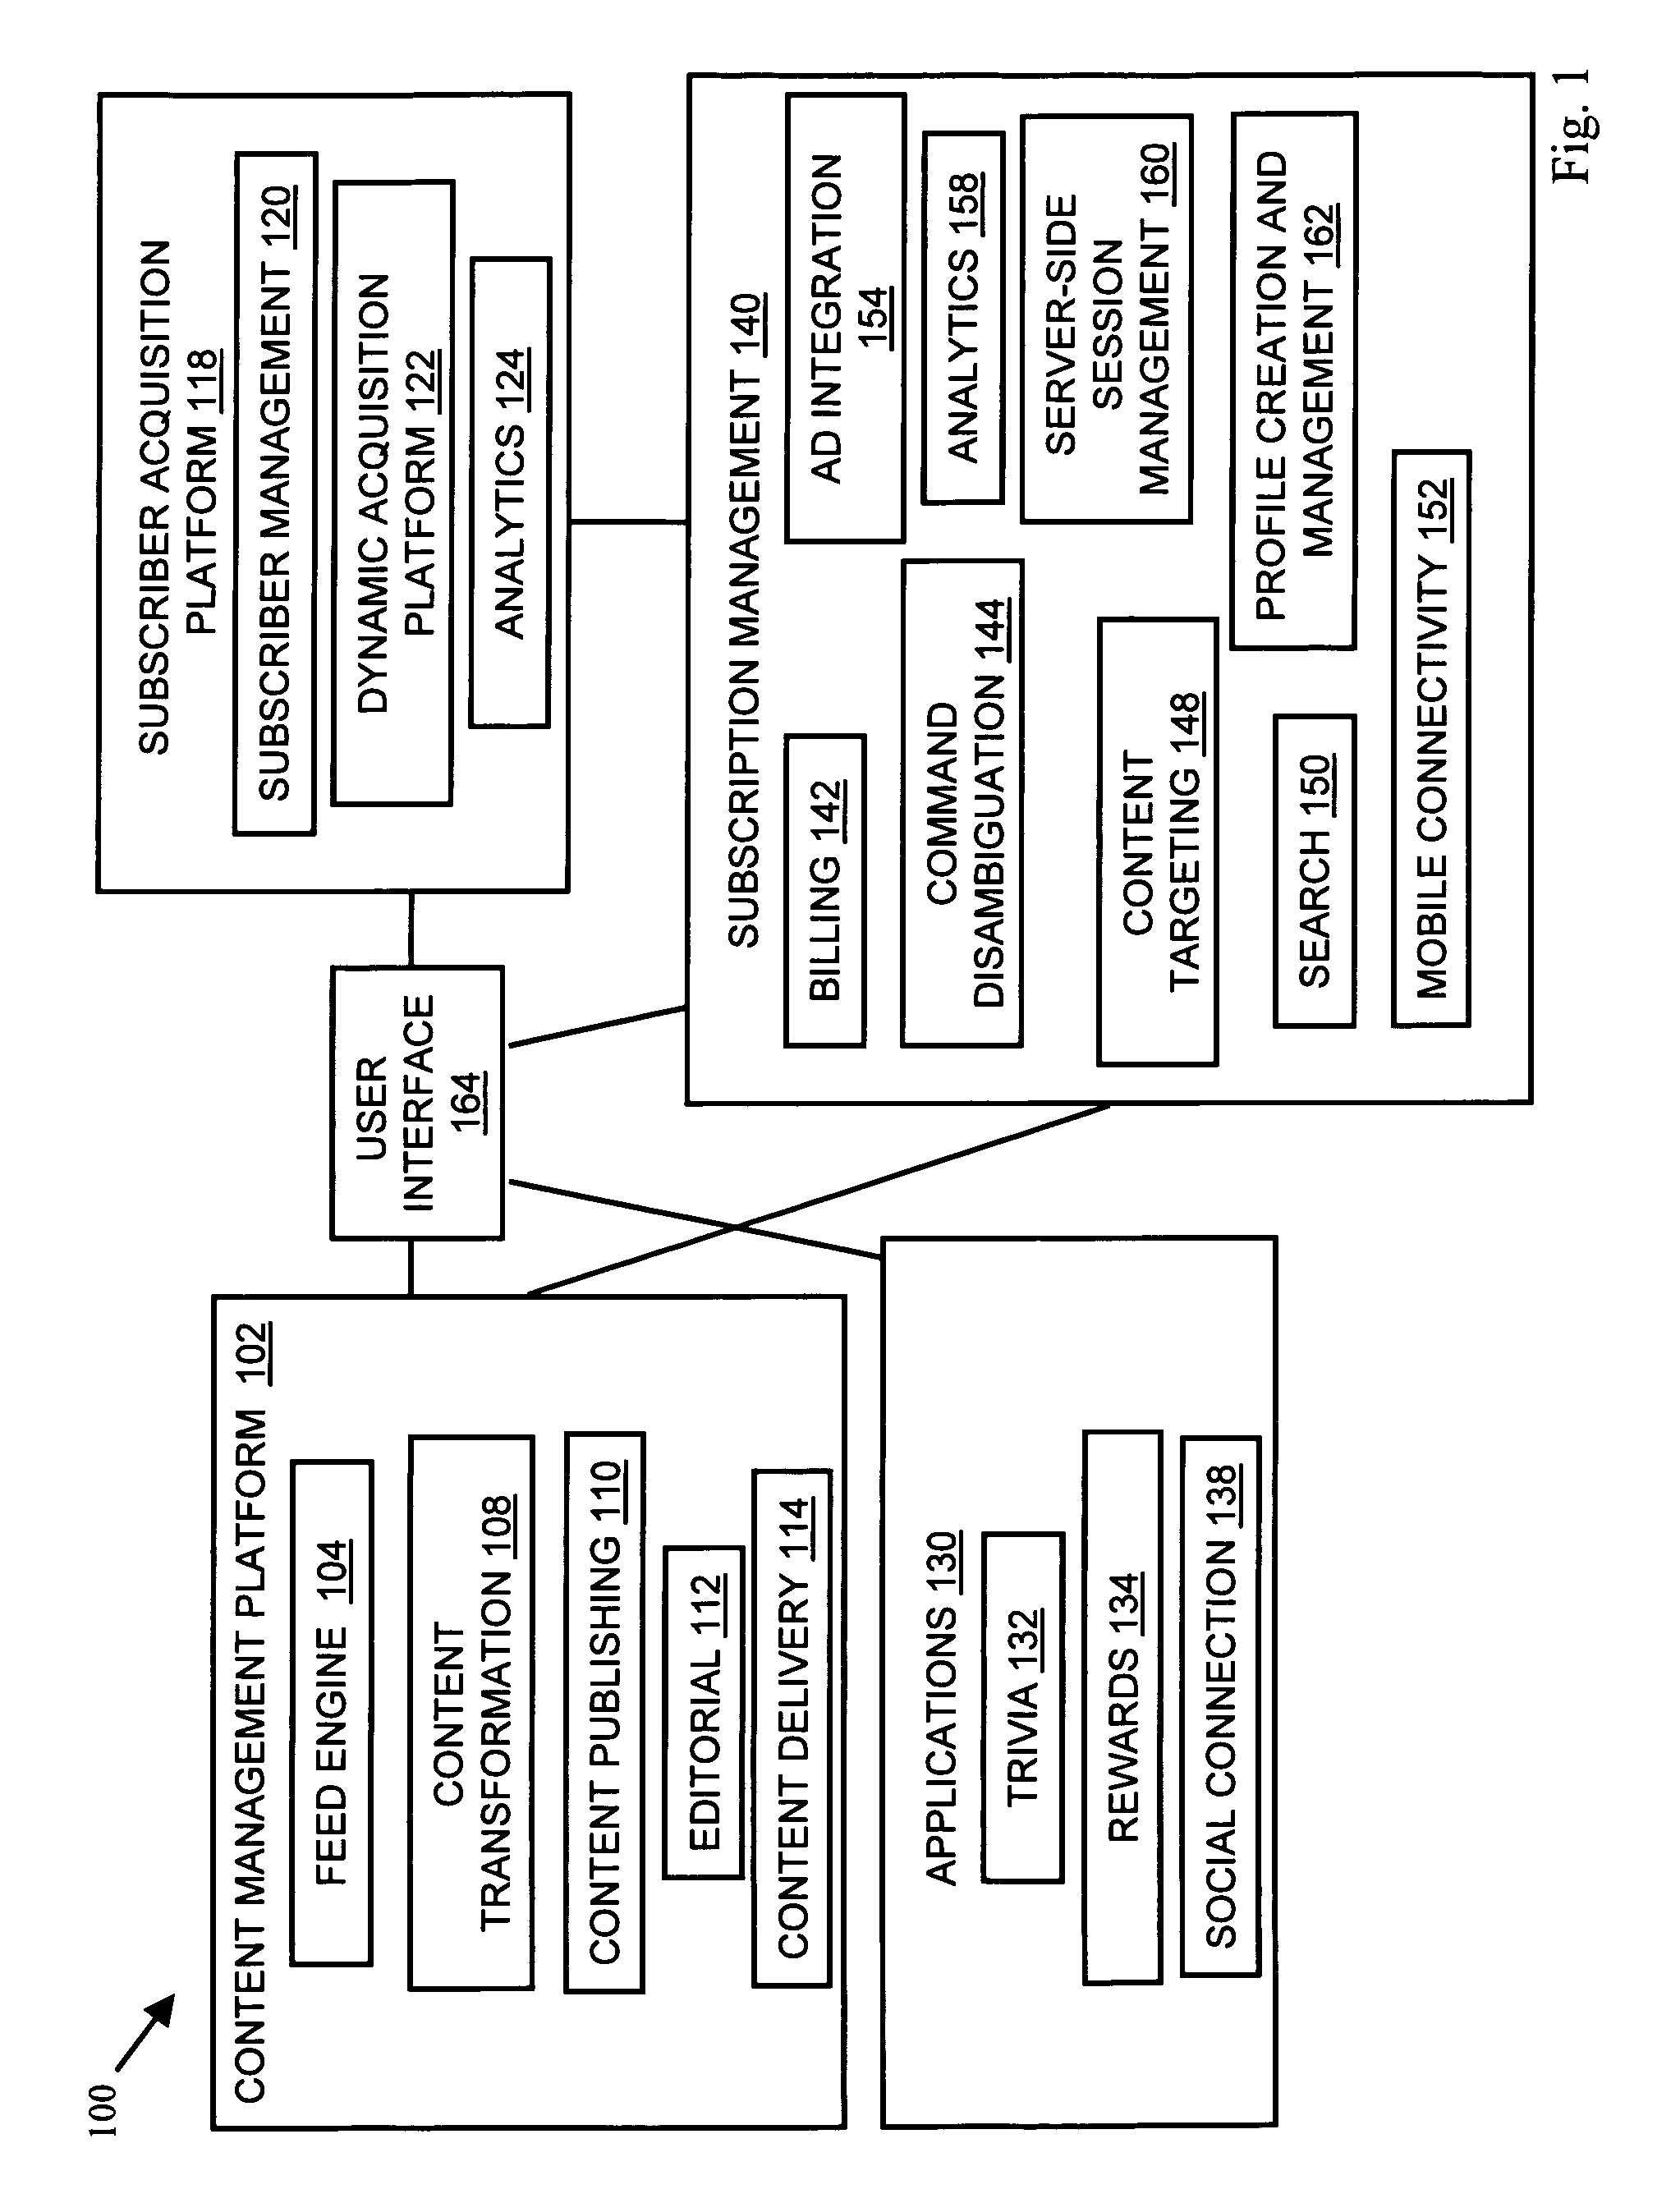 Systems and methods for multi-modal mobile media services